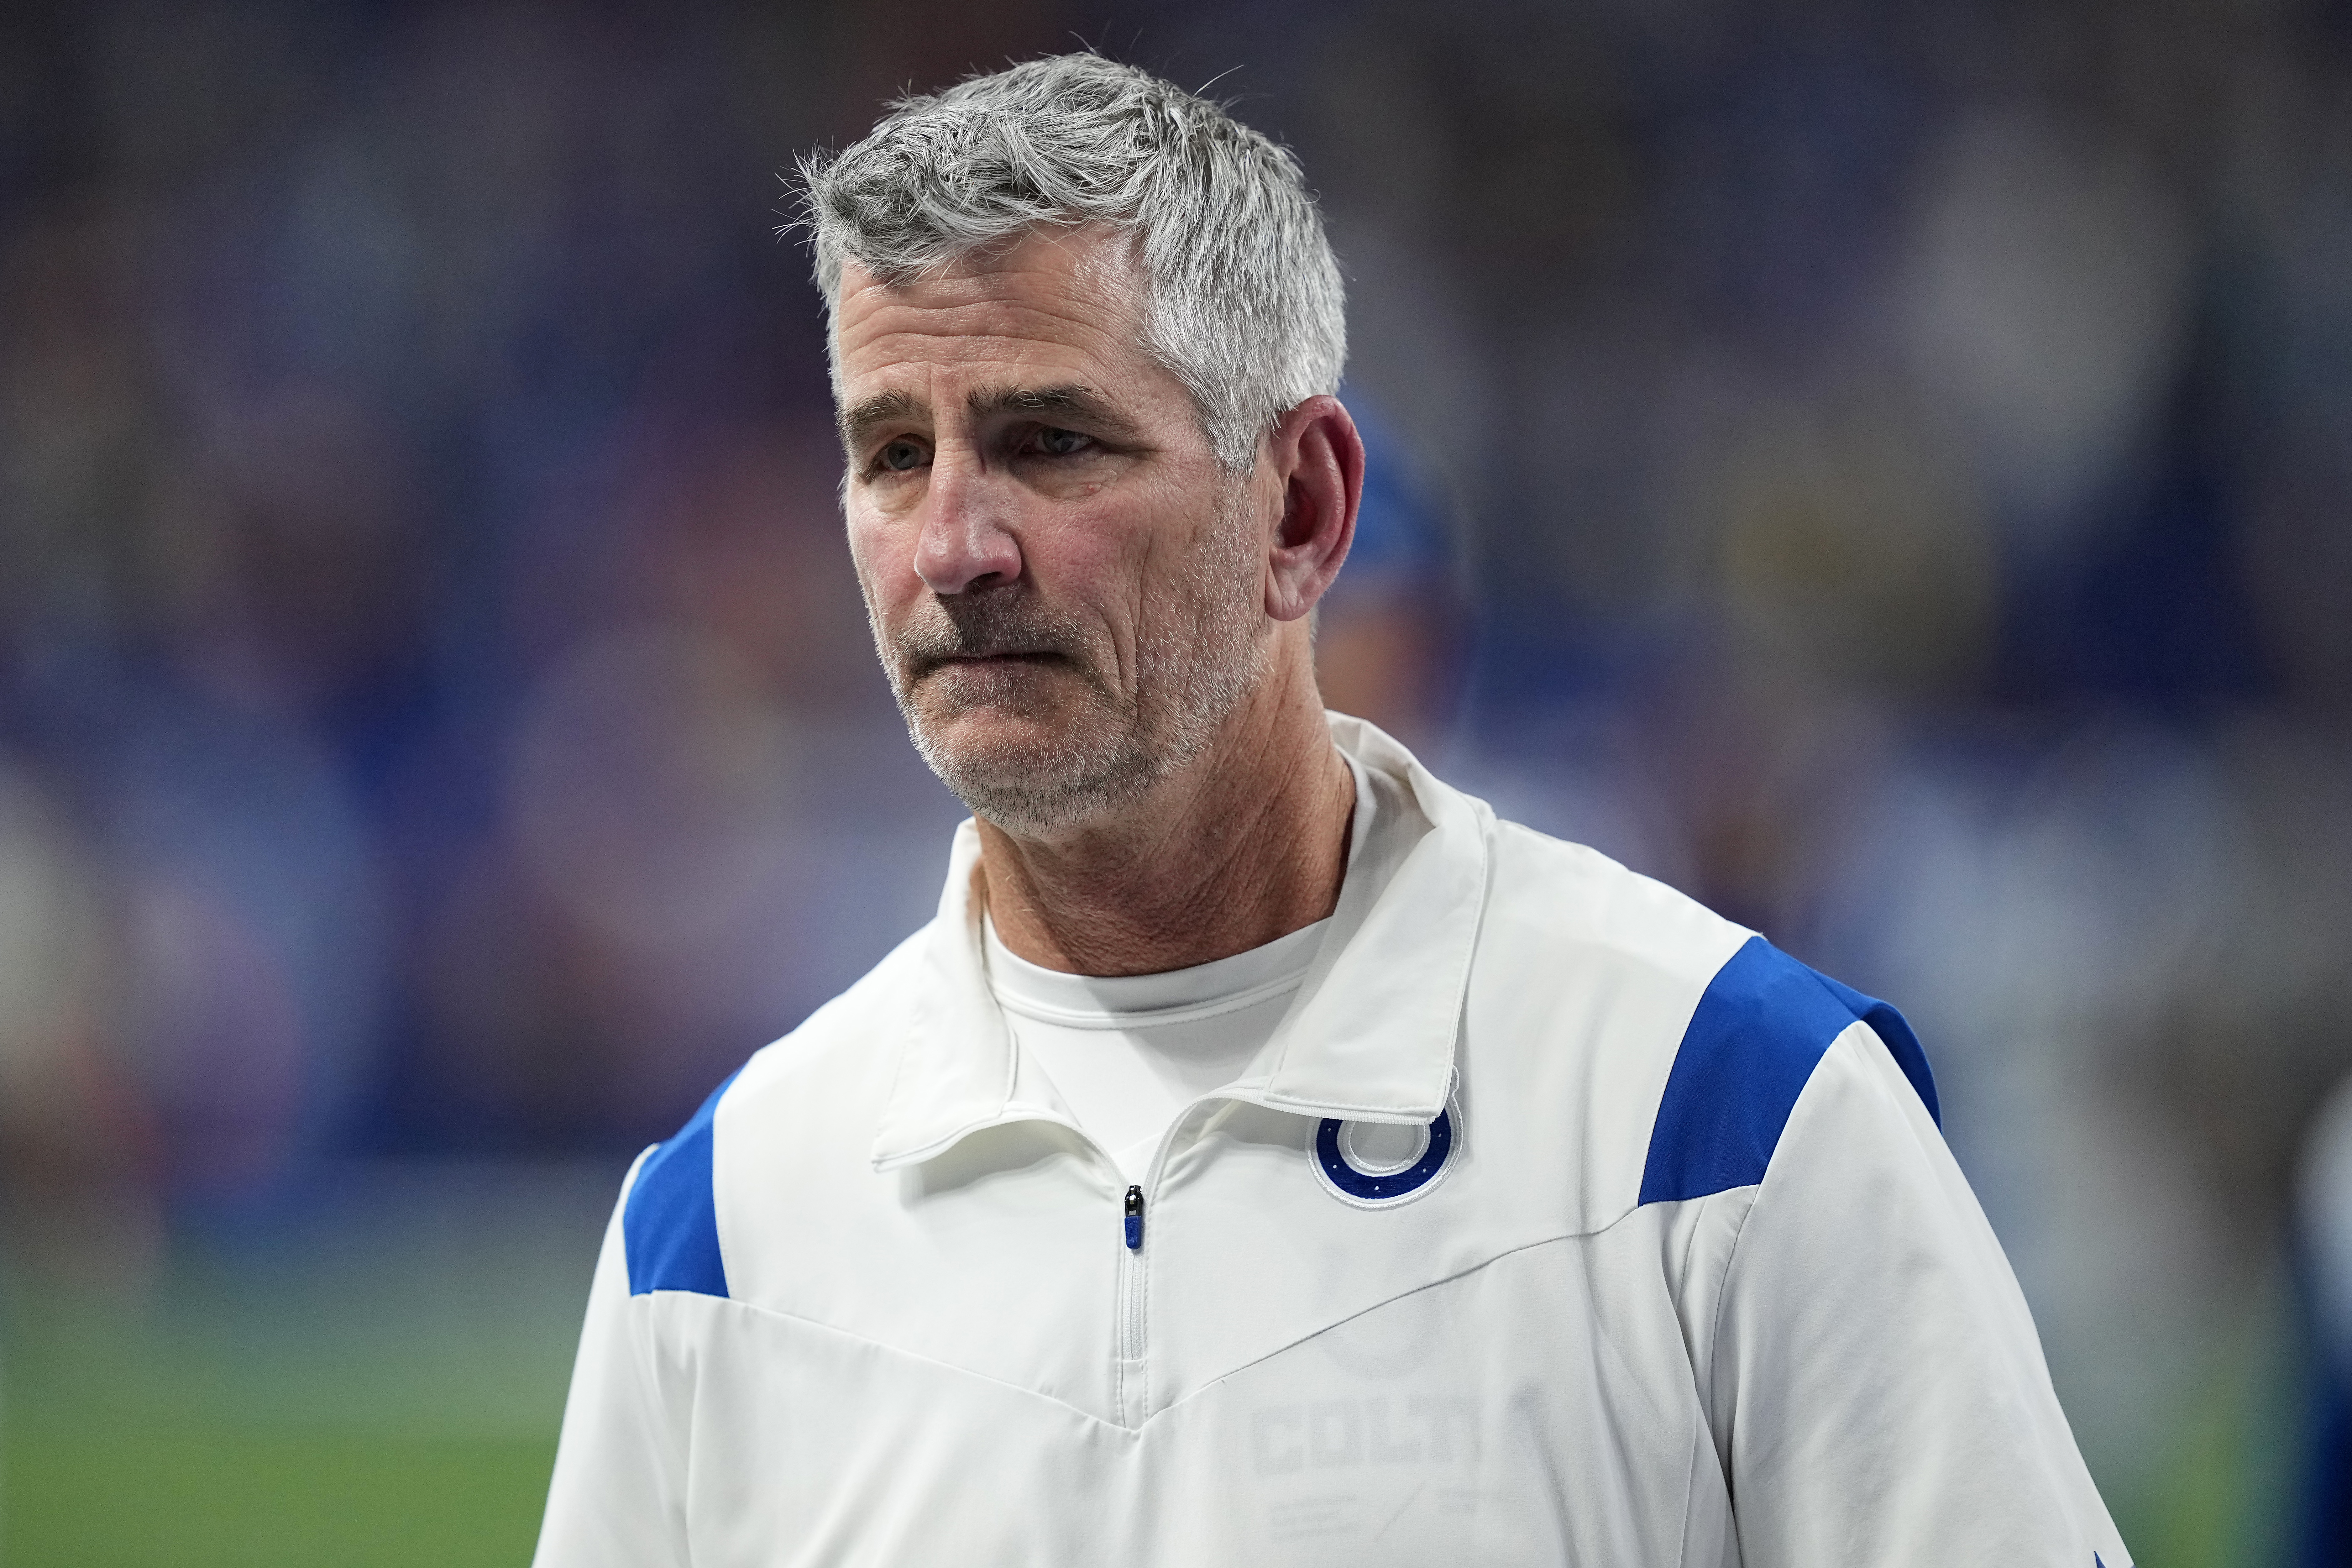 Frank Reich, head coach of the Indianapolis Colts, leaves the field after the 17-16 loss to the the Washington Commanders at Lucas Oil Stadium in Indianapolis, Indiana, October 30, 2022. /CFP 